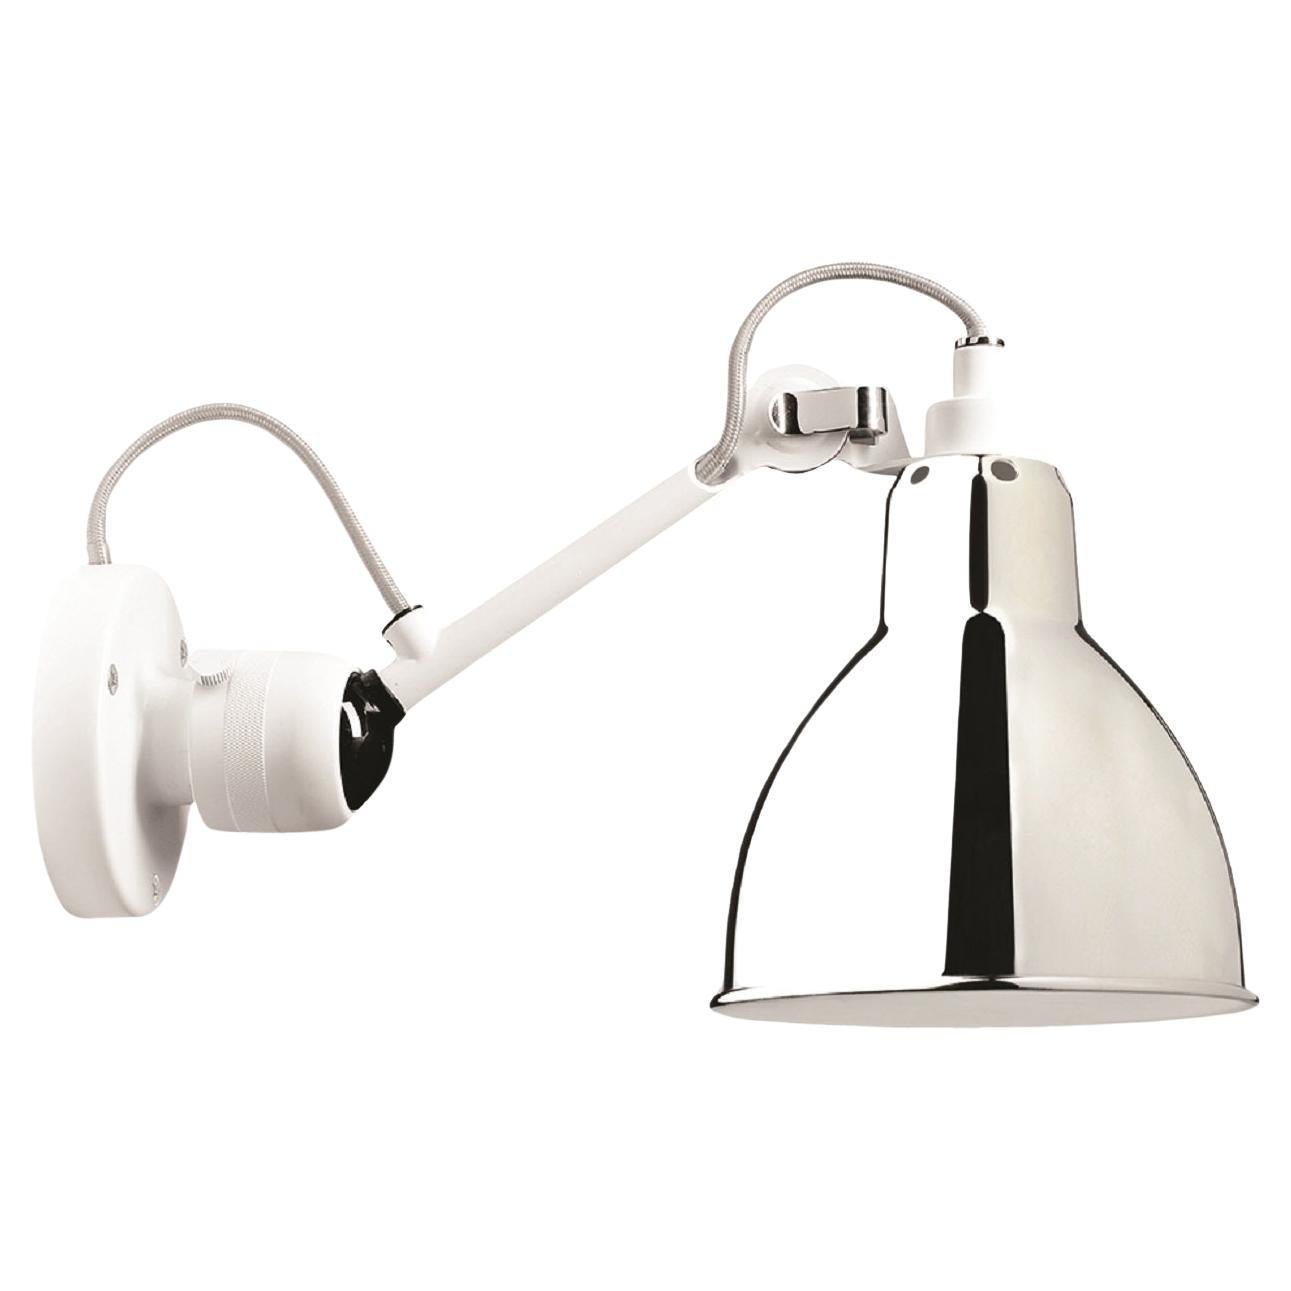 DCW Editions La Lampe Gras N°304 Wall Lamp in White Arm and Chrome Shade For Sale